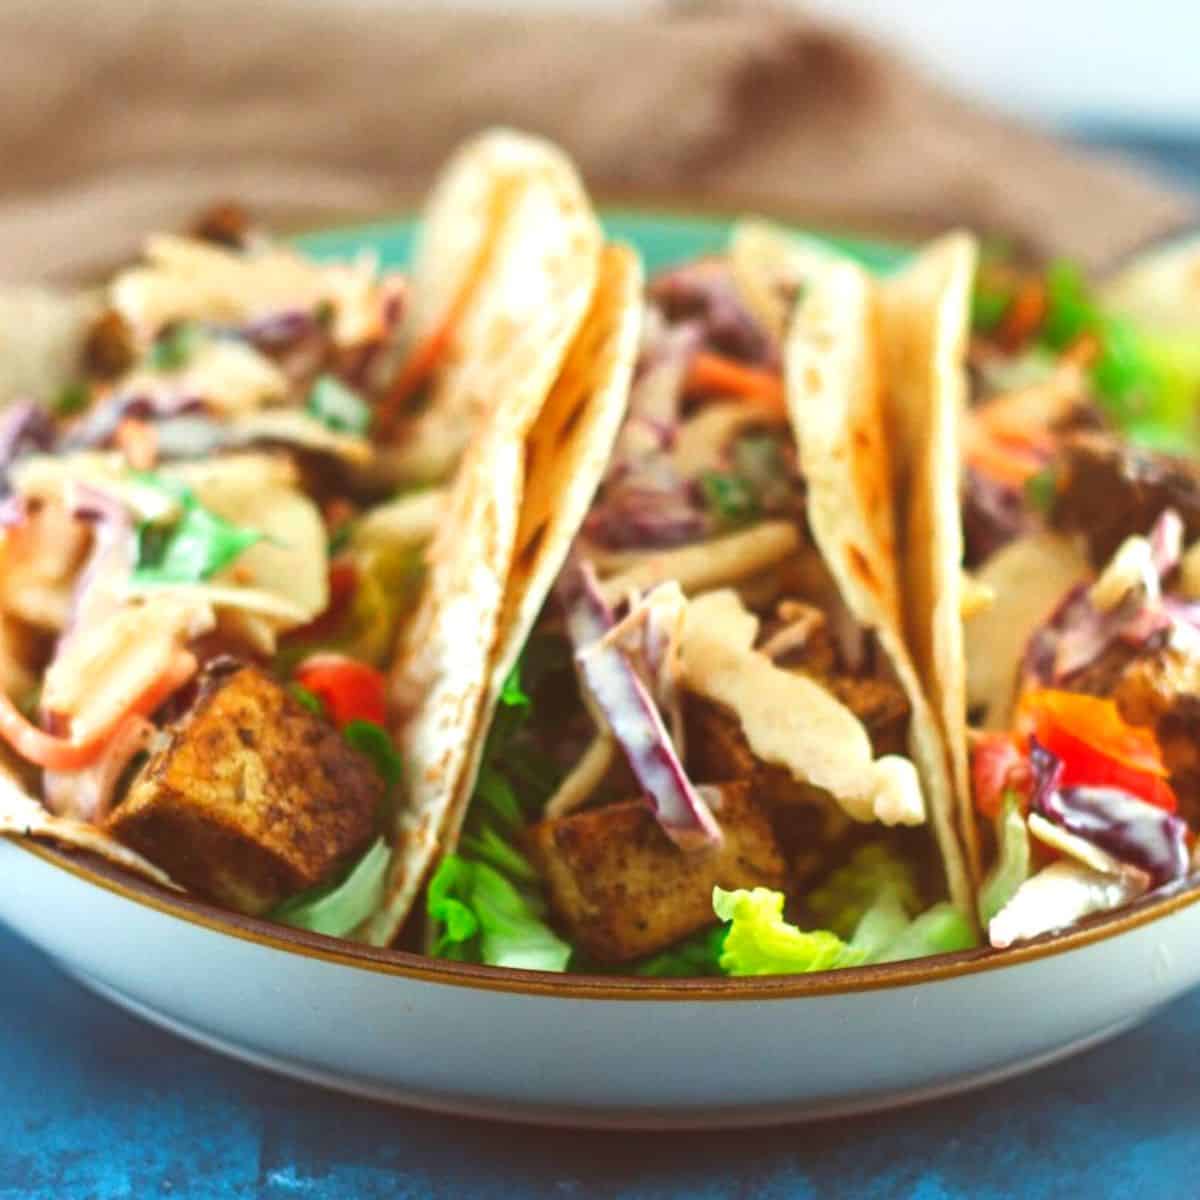 A plate of tofu tacos with salad